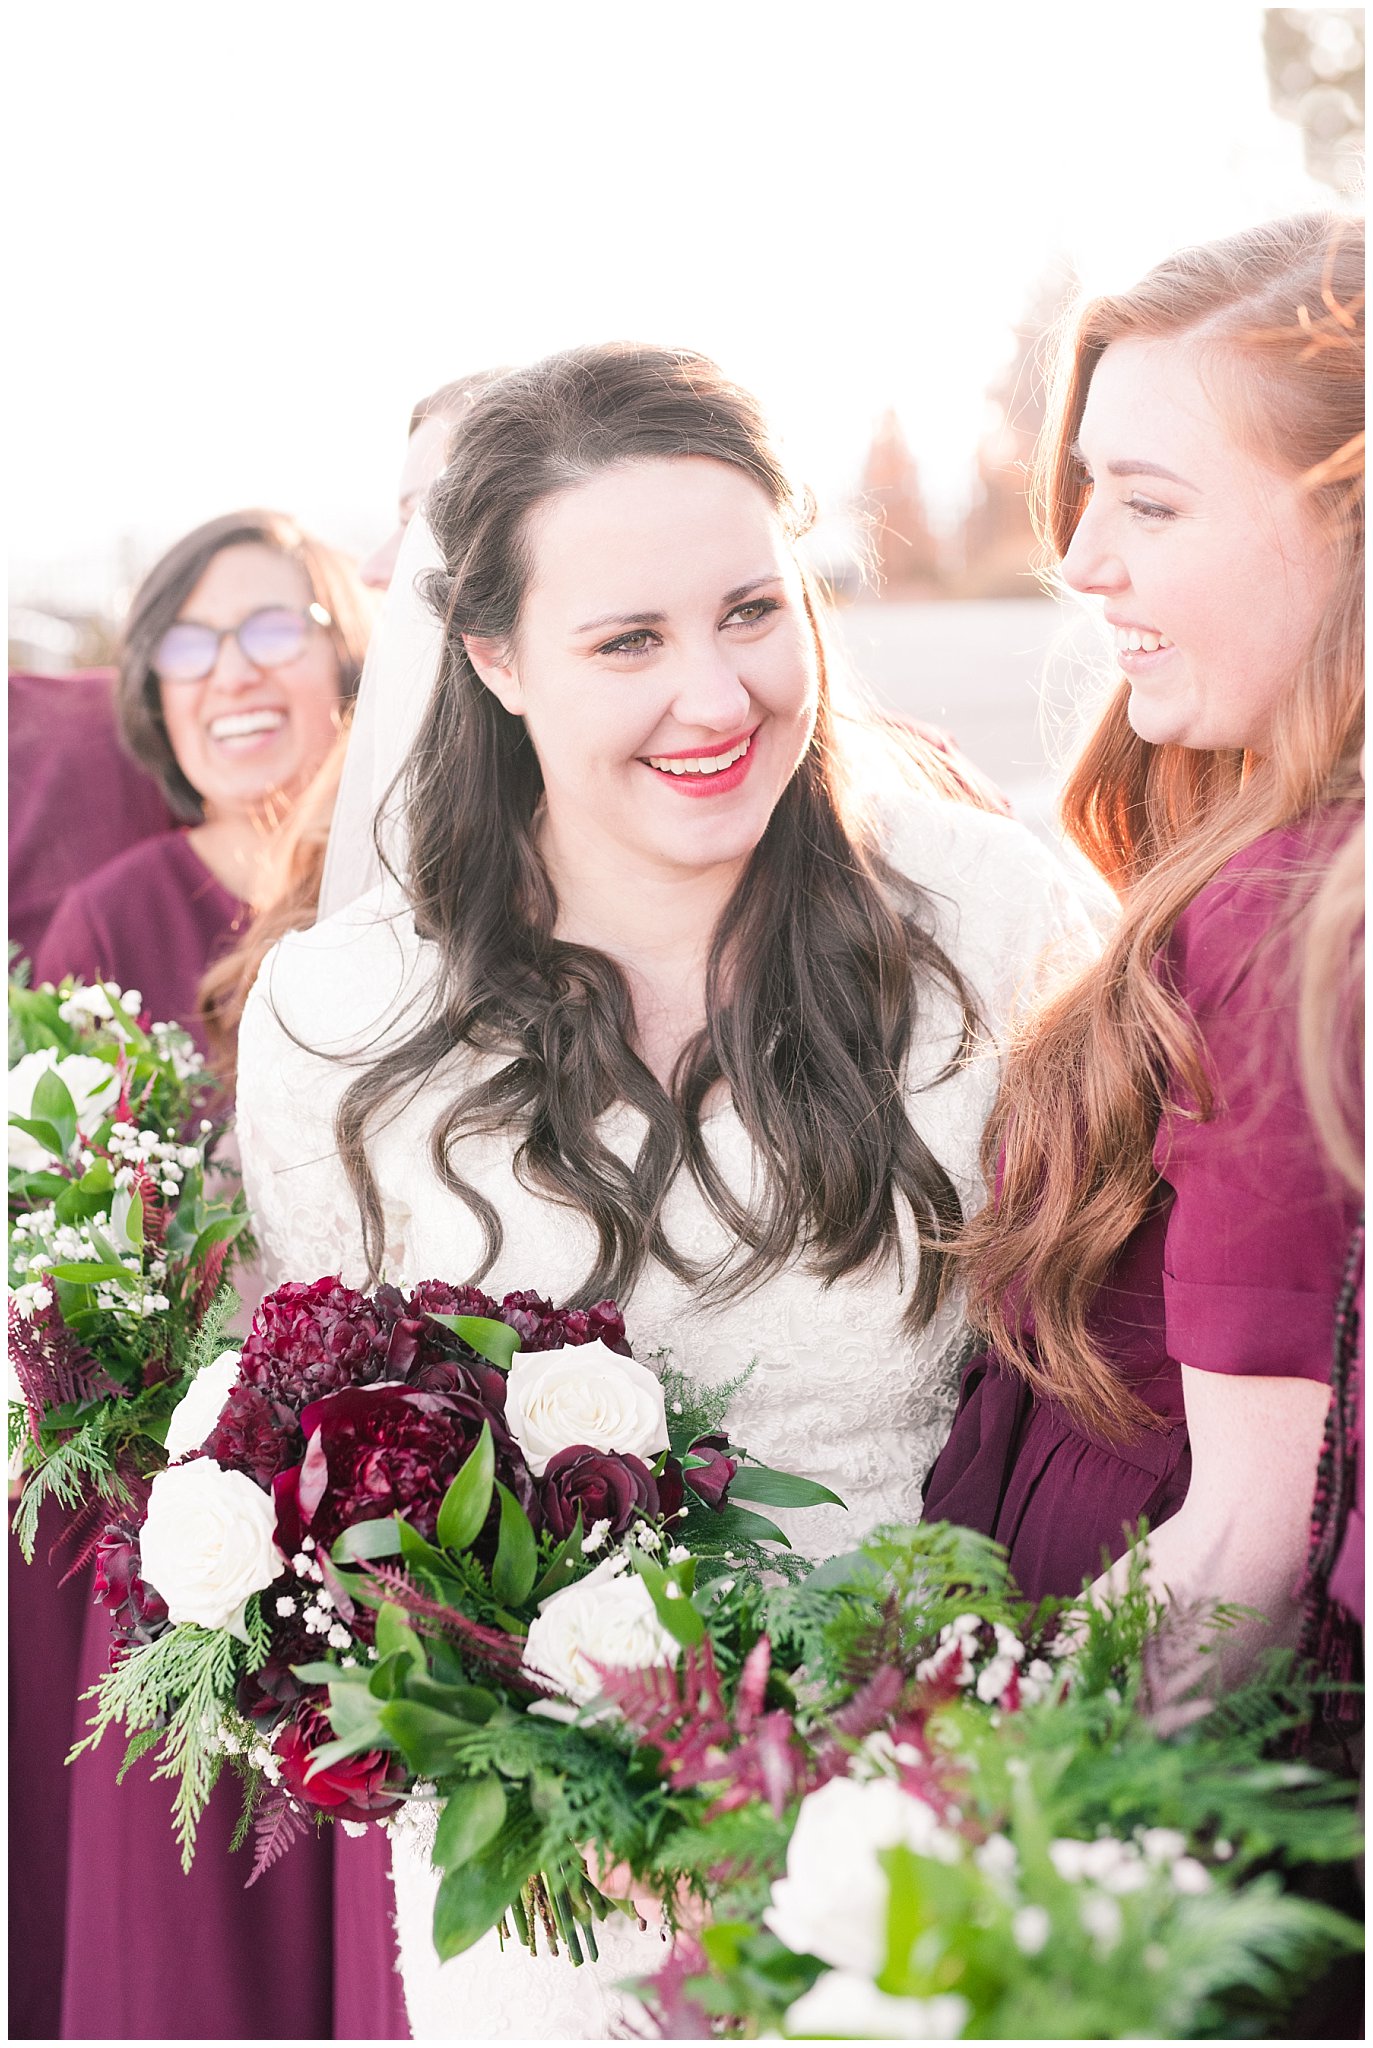 Bridesmaids portraits in burgundy and black at the Oquirrh Mountain Temple | Oquirrh Mountain Temple and Gardner Village Wedding | The Gathering Place | Jessie and Dallin Photography